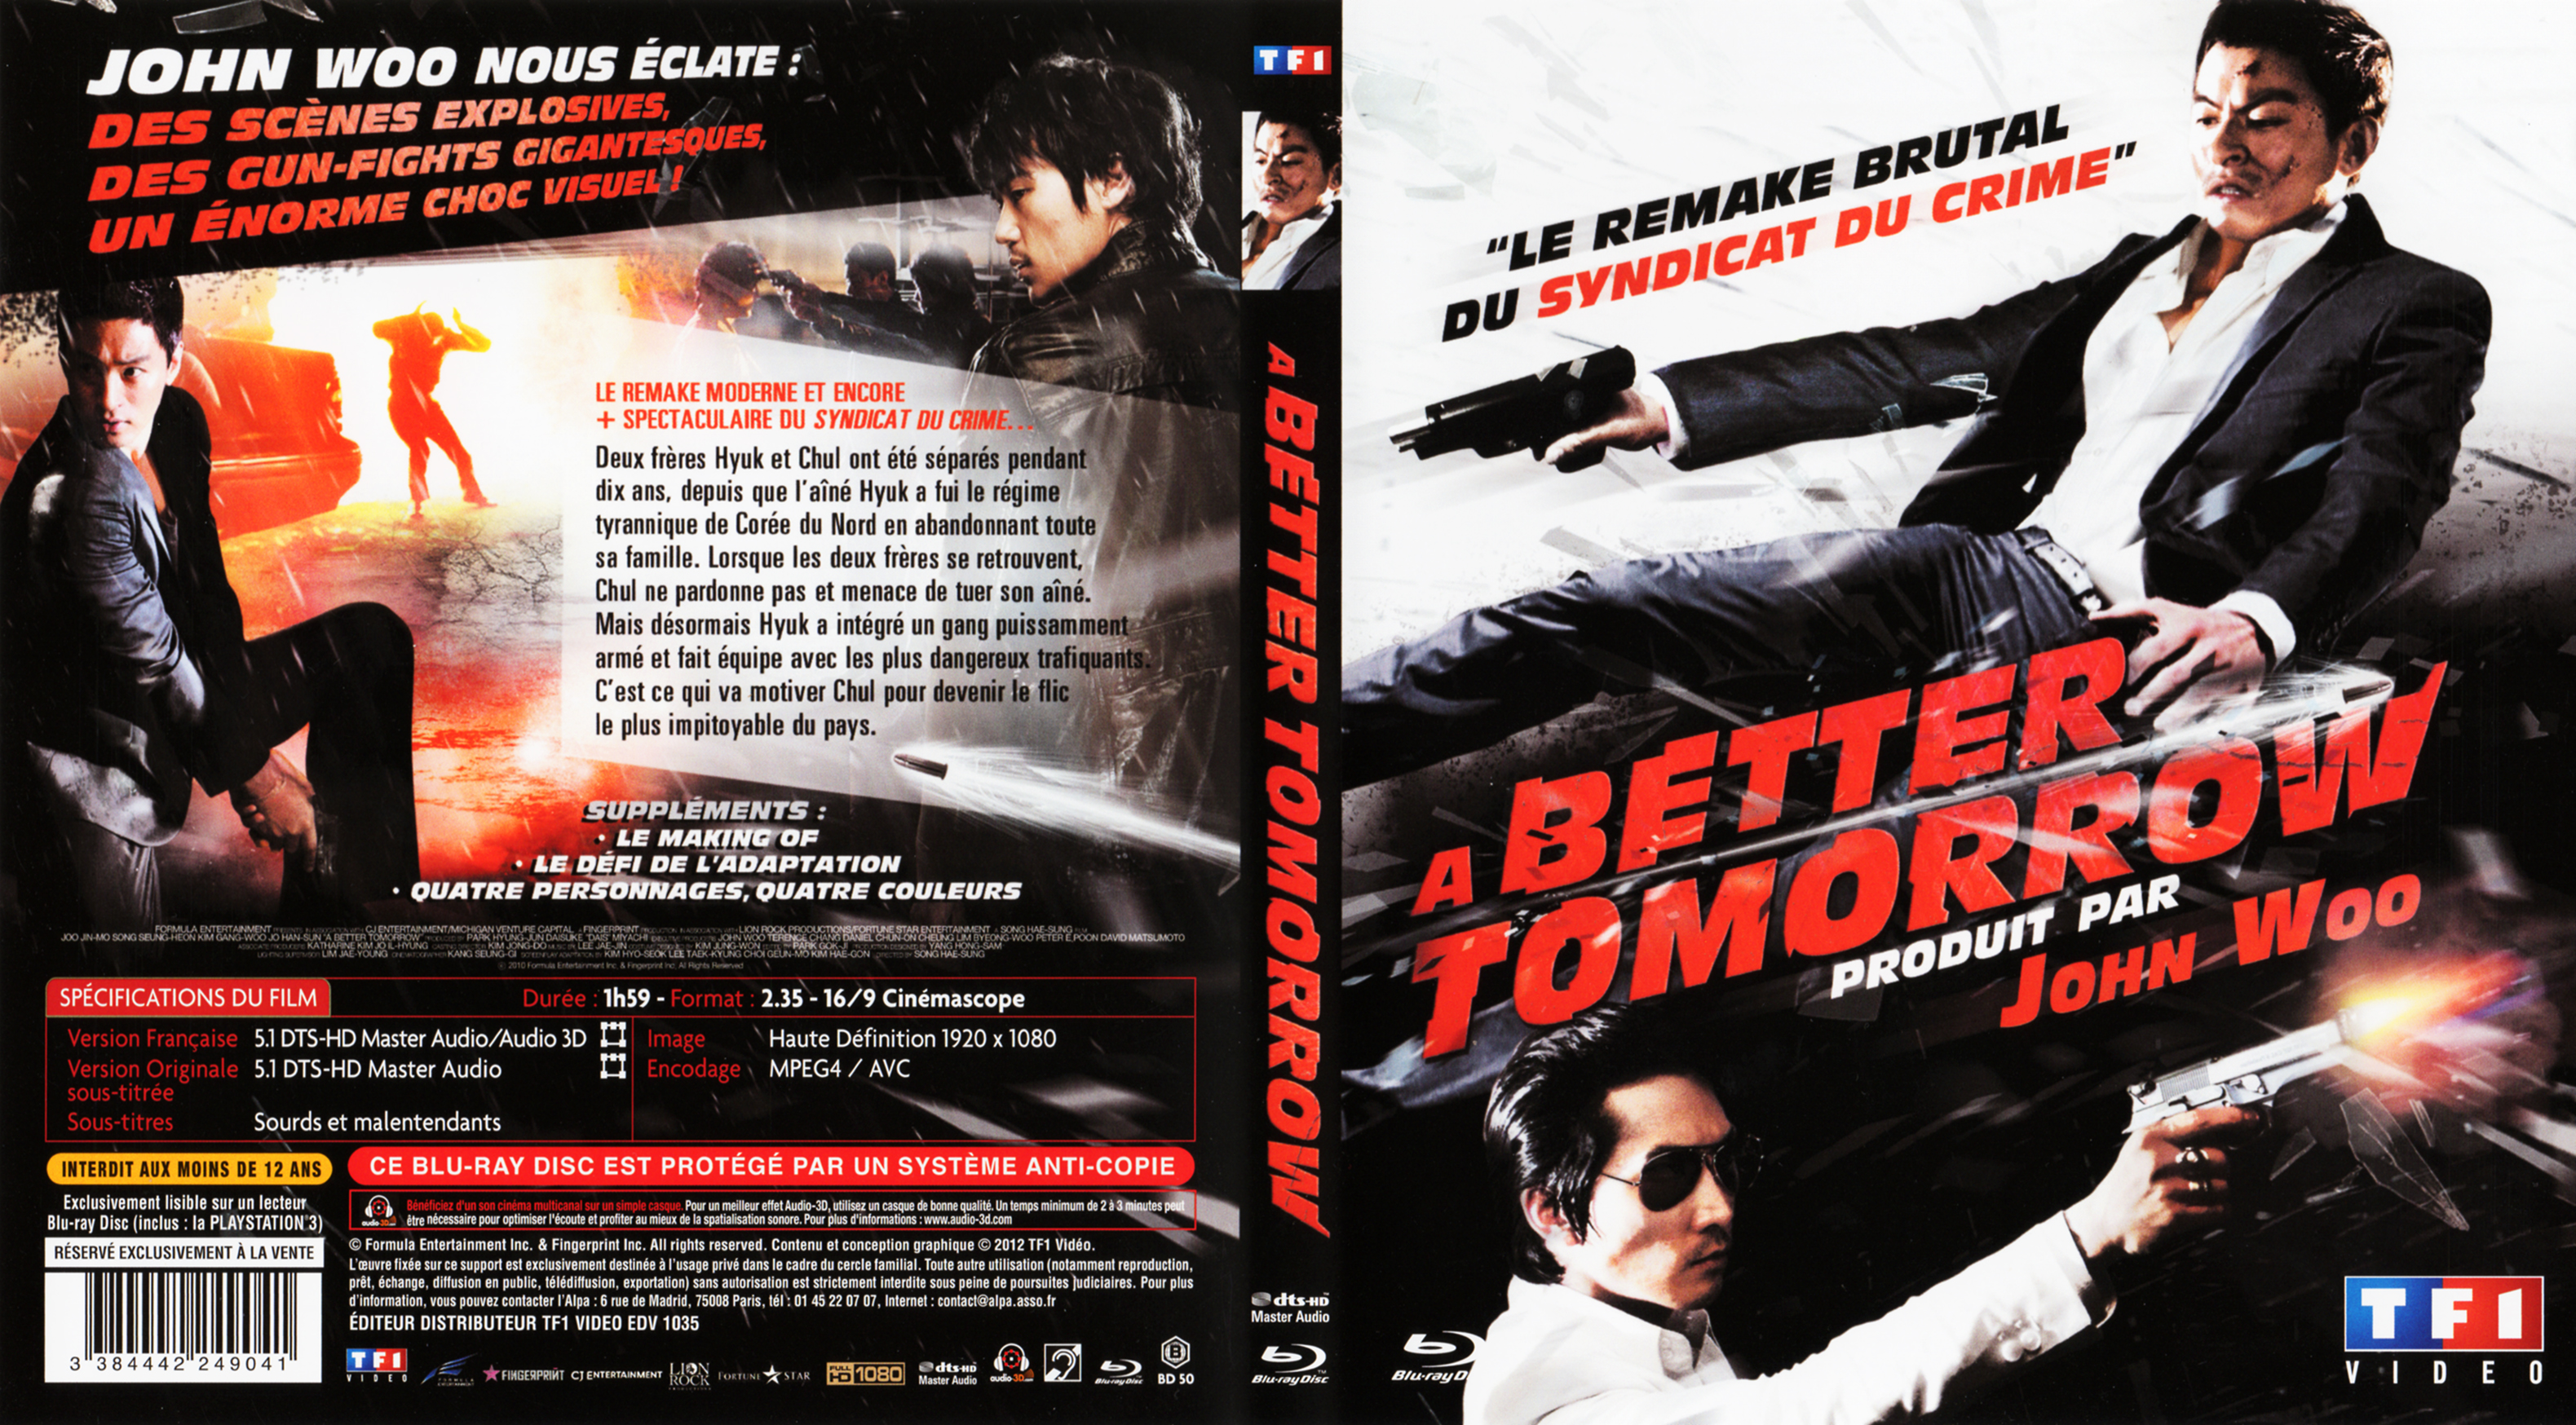 Jaquette DVD A Better Tomorrow (BLU-RAY)